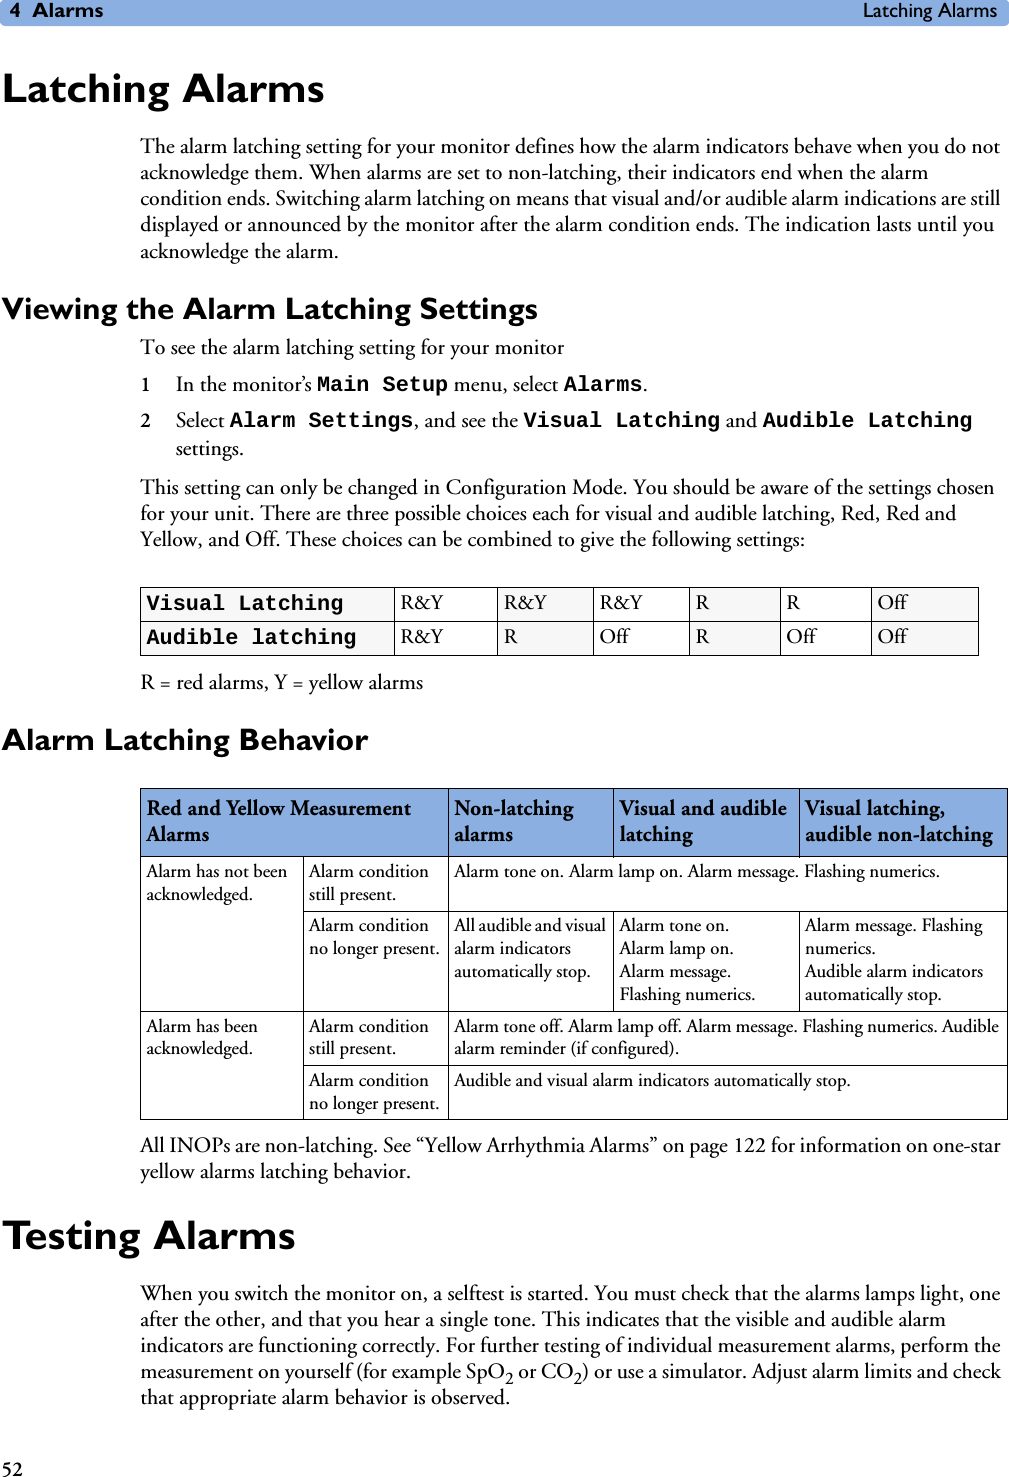 4Alarms Latching Alarms52Latching AlarmsThe alarm latching setting for your monitor defines how the alarm indicators behave when you do not acknowledge them. When alarms are set to non-latching, their indicators end when the alarm condition ends. Switching alarm latching on means that visual and/or audible alarm indications are still displayed or announced by the monitor after the alarm condition ends. The indication lasts until you acknowledge the alarm. Viewing the Alarm Latching SettingsTo see the alarm latching setting for your monitor 1In the monitor’s Main Setup menu, select Alarms.2Select Alarm Settings, and see the Visual Latching and Audible Latching settings.This setting can only be changed in Configuration Mode. You should be aware of the settings chosen for your unit. There are three possible choices each for visual and audible latching, Red, Red and Yellow, and Off. These choices can be combined to give the following settings:R = red alarms, Y = yellow alarmsAlarm Latching BehaviorAll INOPs are non-latching. See “Yellow Arrhythmia Alarms” on page 122 for information on one-star yellow alarms latching behavior. Te s t i n g  A l a r m sWhen you switch the monitor on, a selftest is started. You must check that the alarms lamps light, one after the other, and that you hear a single tone. This indicates that the visible and audible alarm indicators are functioning correctly. For further testing of individual measurement alarms, perform the measurement on yourself (for example SpO2 or CO2) or use a simulator. Adjust alarm limits and check that appropriate alarm behavior is observed.Visual Latching R&amp;Y R&amp;Y R&amp;Y RROffAudible latching R&amp;Y ROffROffOffRed and Yellow Measurement AlarmsNon-latching alarmsVisual and audible latchingVisual latching, audible non-latchingAlarm has not been acknowledged.Alarm condition still present.Alarm tone on. Alarm lamp on. Alarm message. Flashing numerics.Alarm condition no longer present.All audible and visual alarm indicators automatically stop.Alarm tone on.Alarm lamp on. Alarm message. Flashing numerics. Alarm message. Flashing numerics.Audible alarm indicators automatically stop. Alarm has been acknowledged.Alarm condition still present.Alarm tone off. Alarm lamp off. Alarm message. Flashing numerics. Audible alarm reminder (if configured). Alarm condition no longer present.Audible and visual alarm indicators automatically stop.